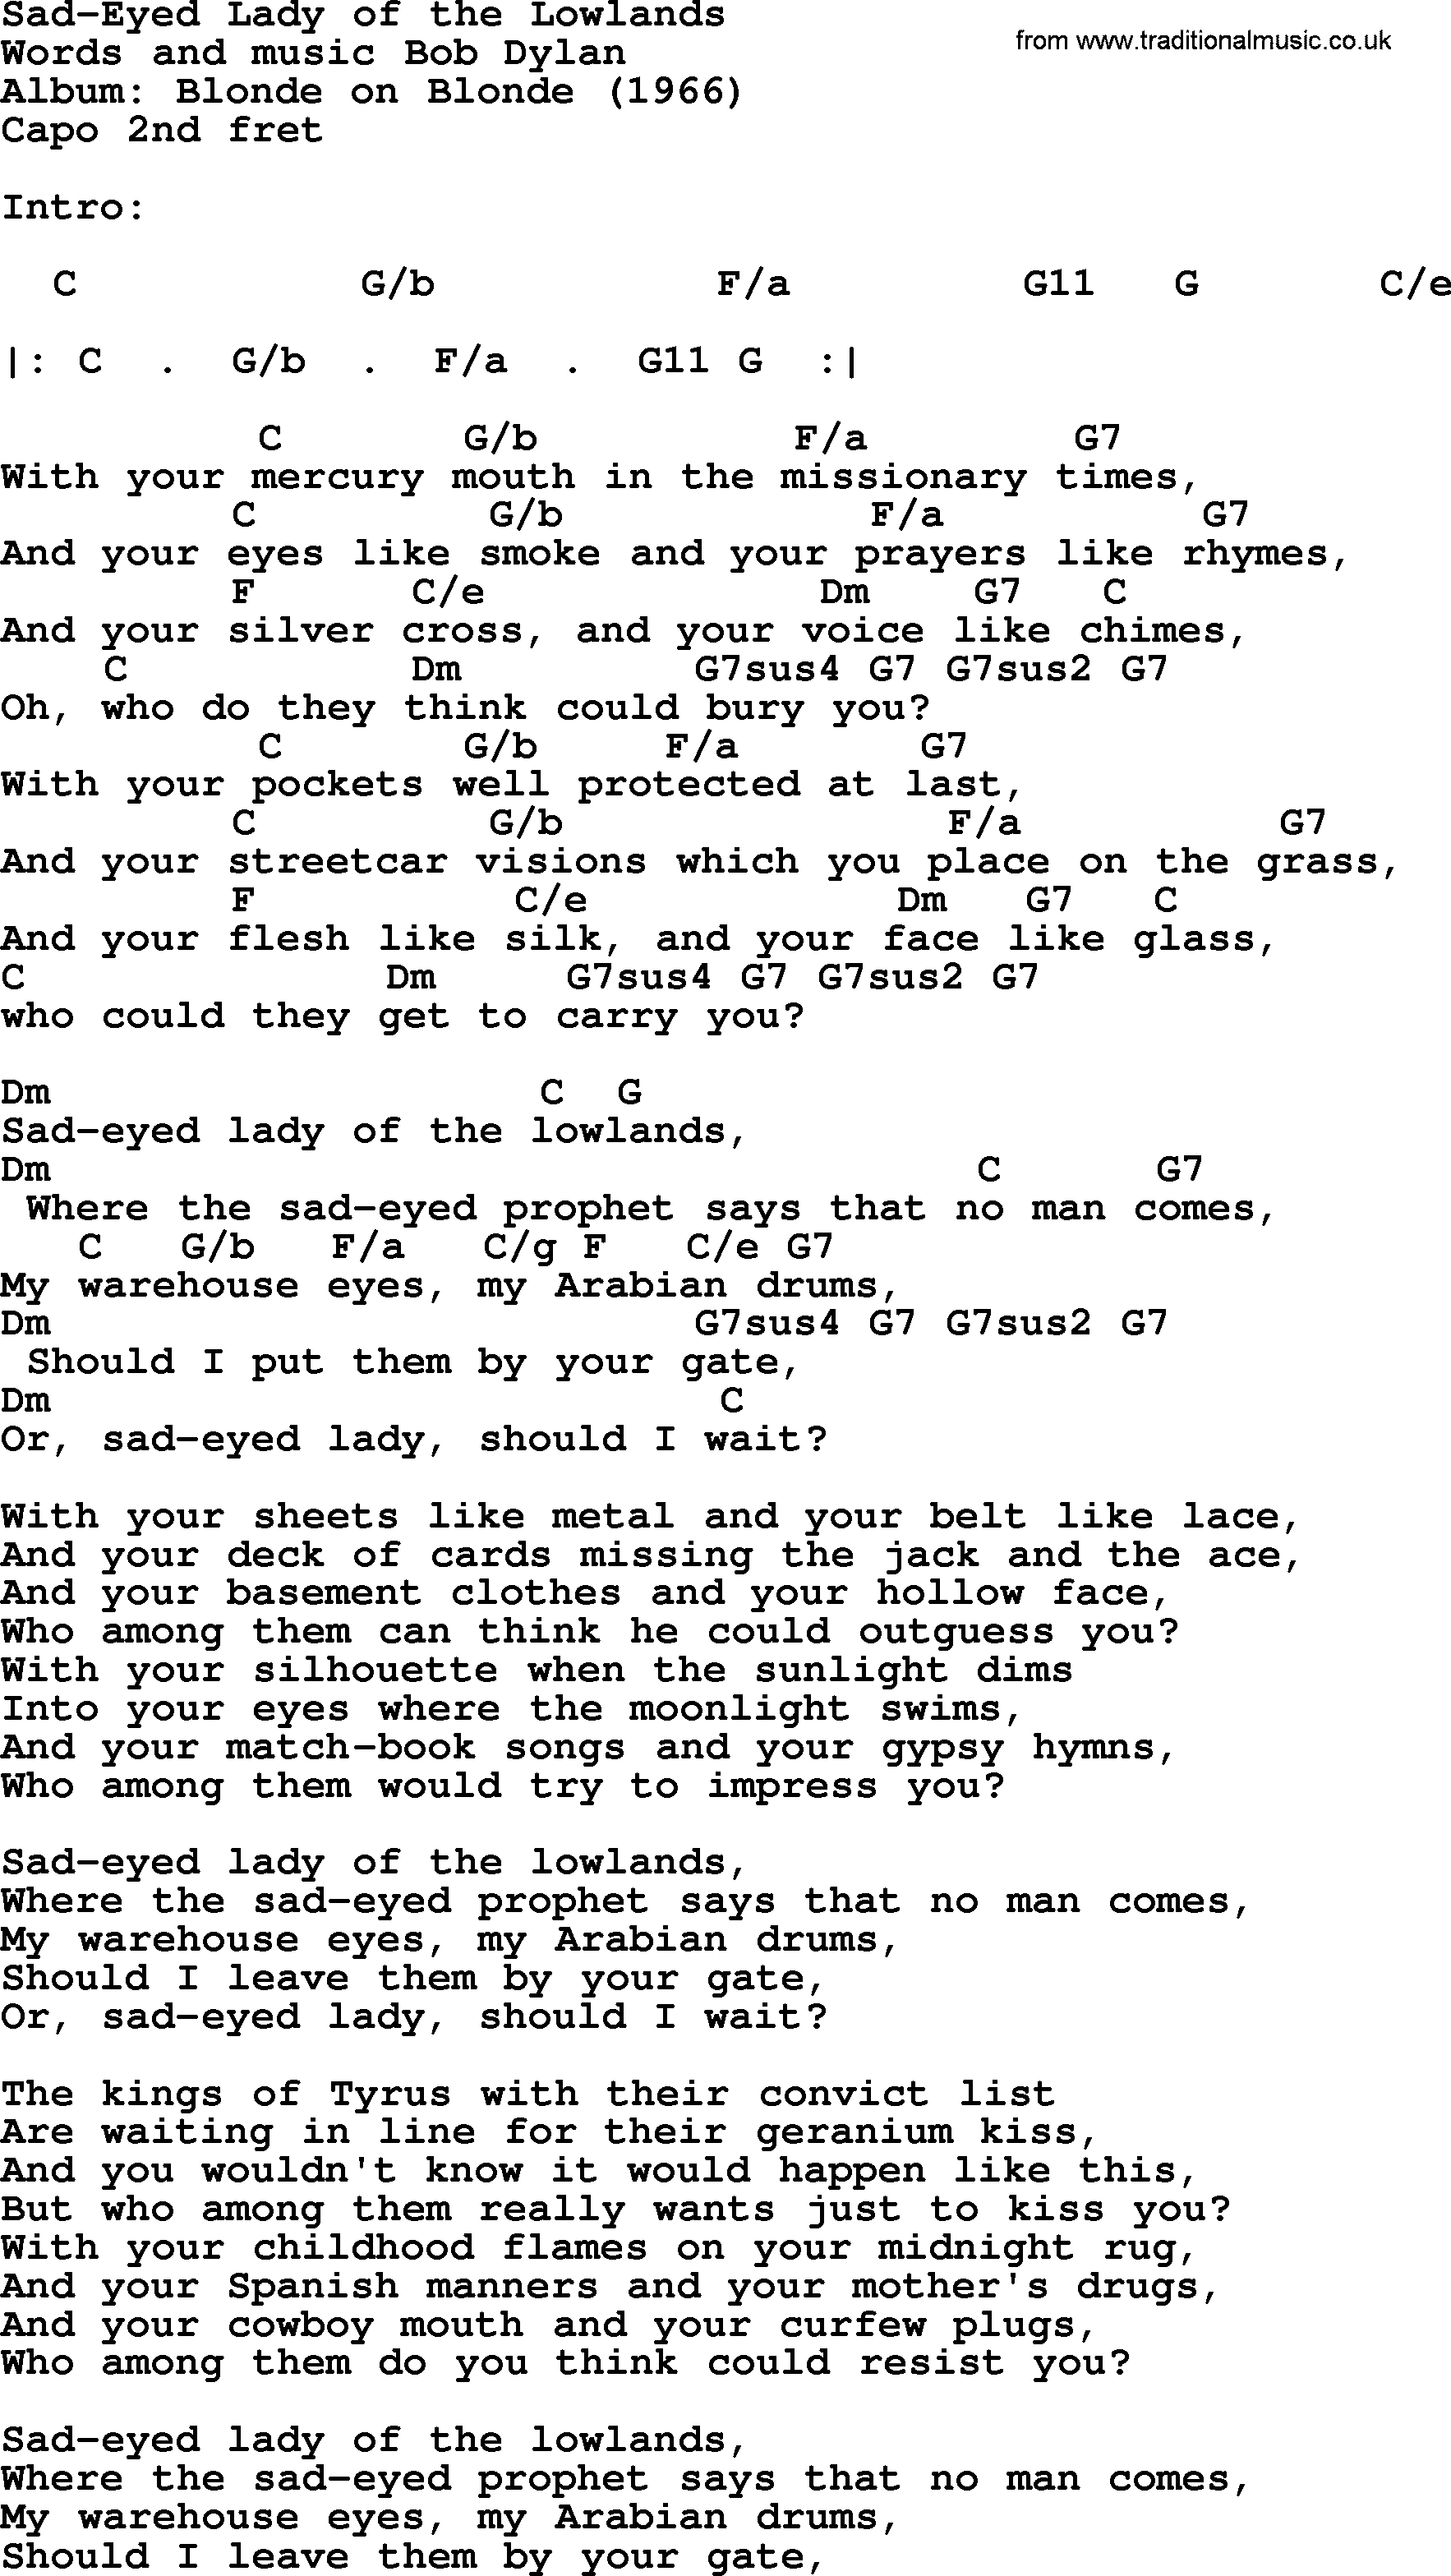 Bob Dylan song, lyrics with chords - Sad-Eyed Lady of the Lowlands